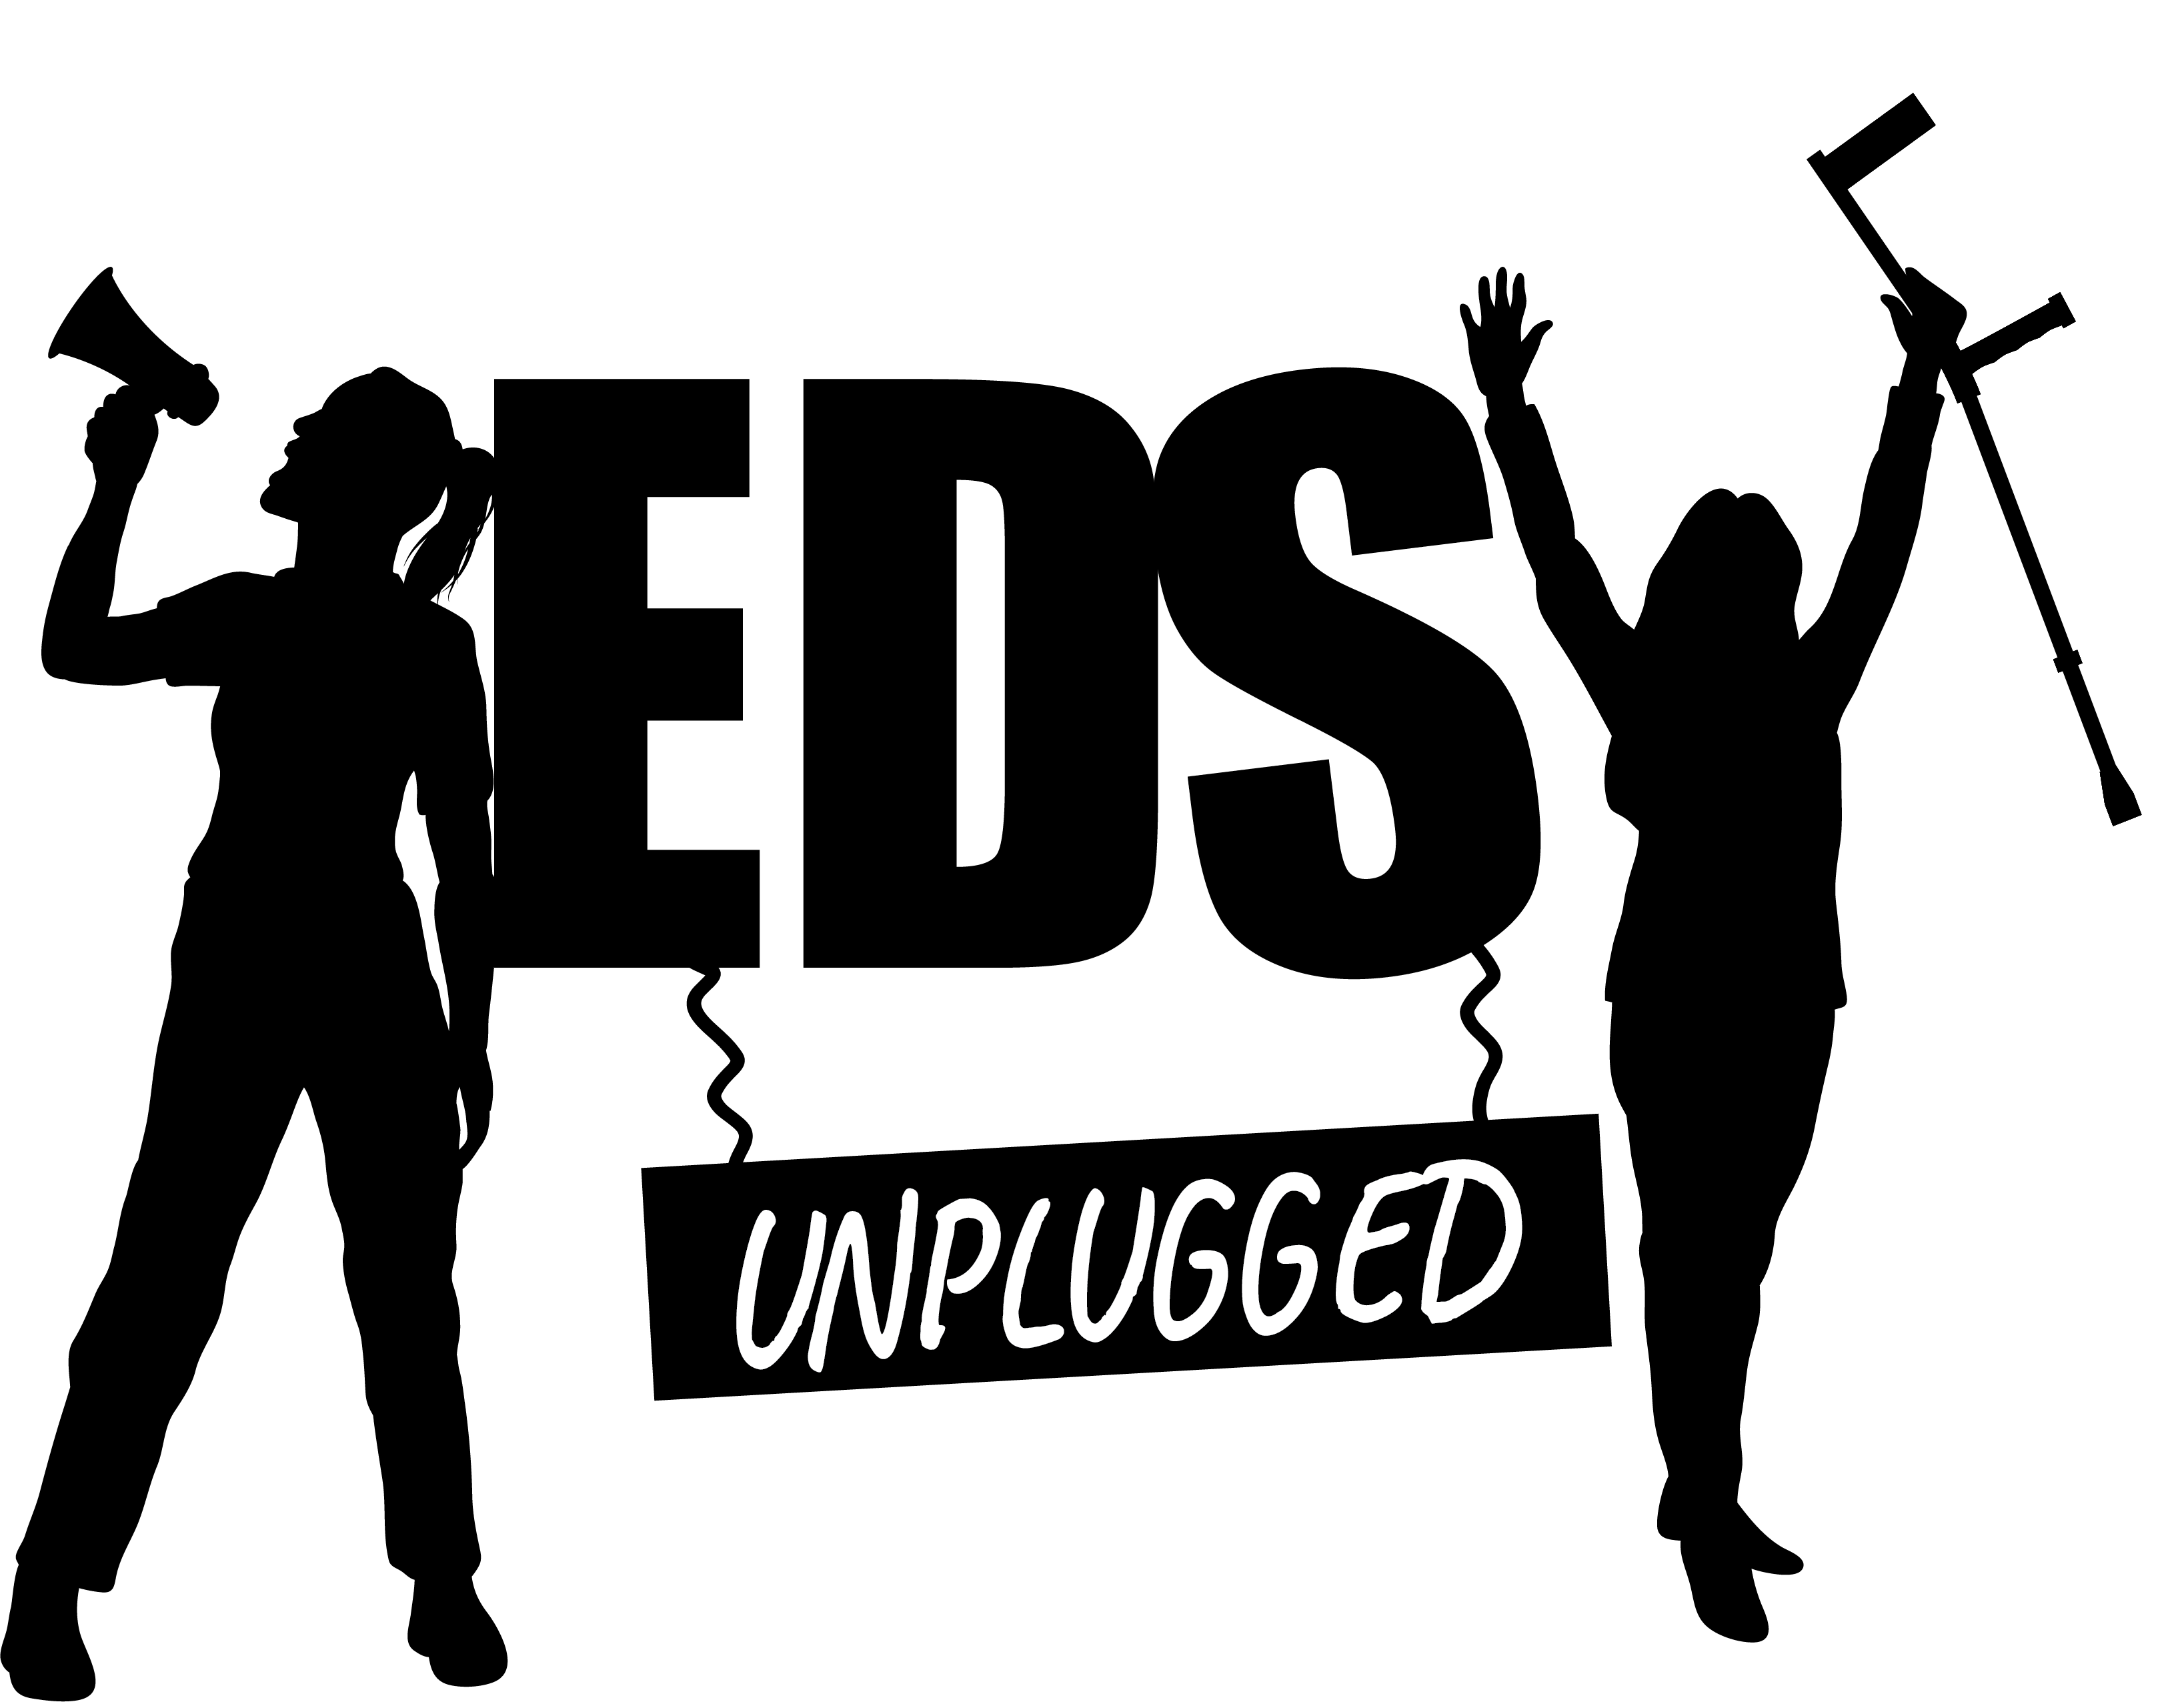 EDS unplugged - 2023 Invisible Disabilities Week Partner - Invisible Disabilities Association